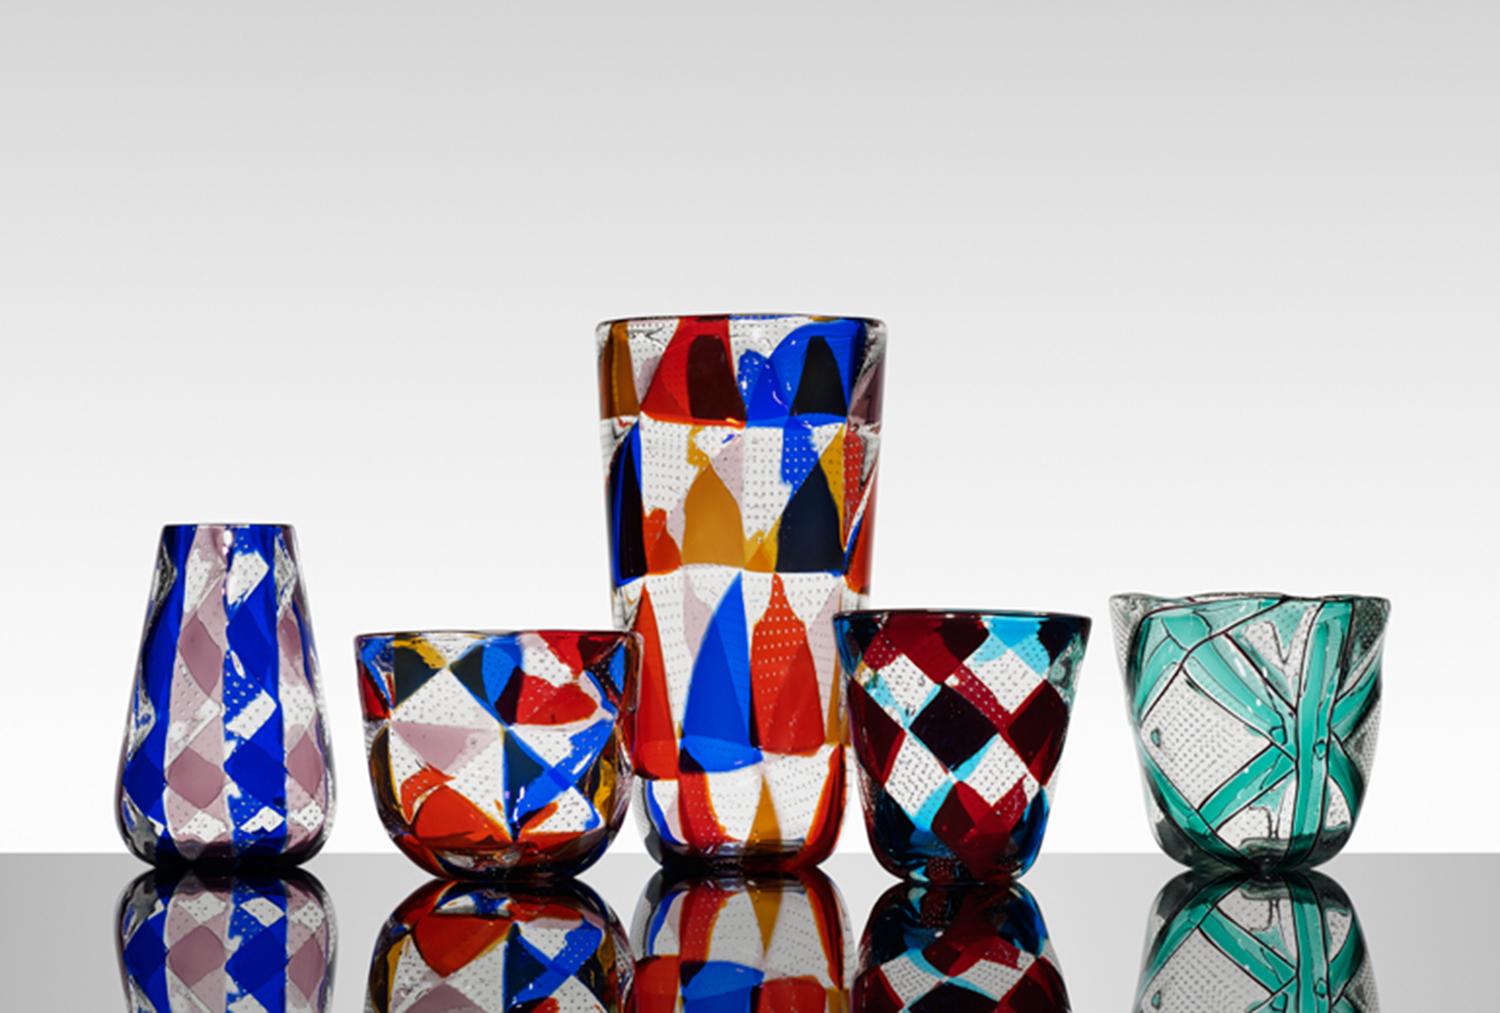 Italian glass masterworks to be auctioned at Wright, June 13